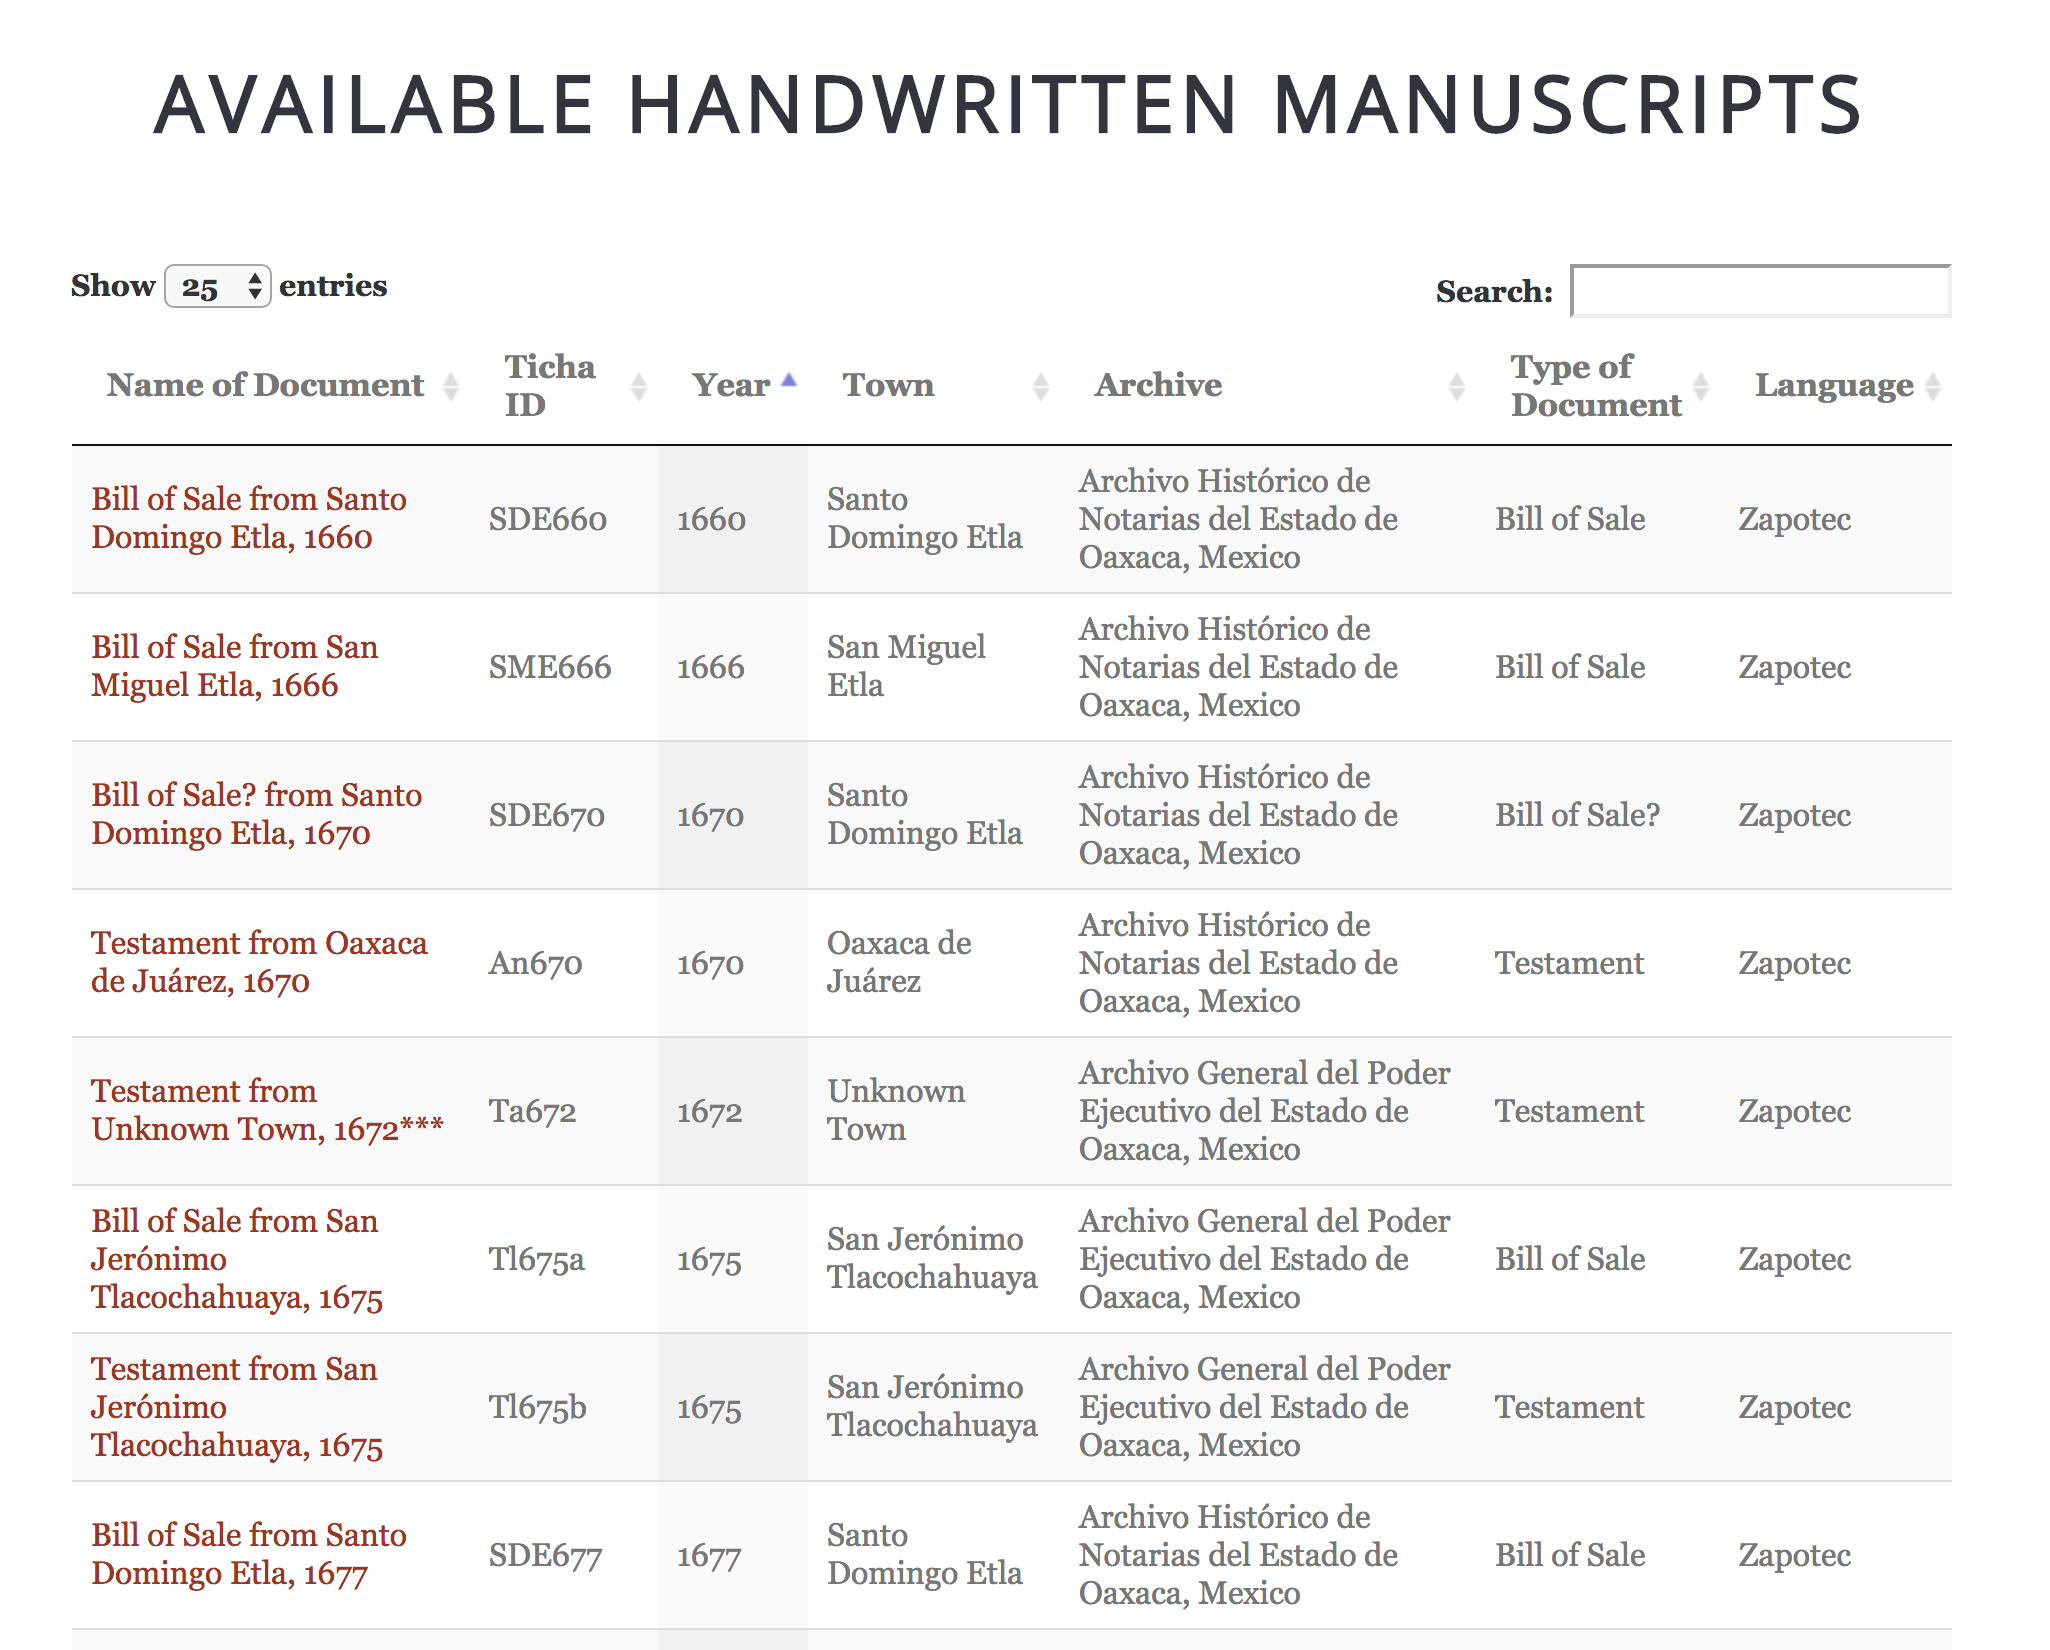 A table of available manuscipts including metadata on year, langauge,
                        and so on.